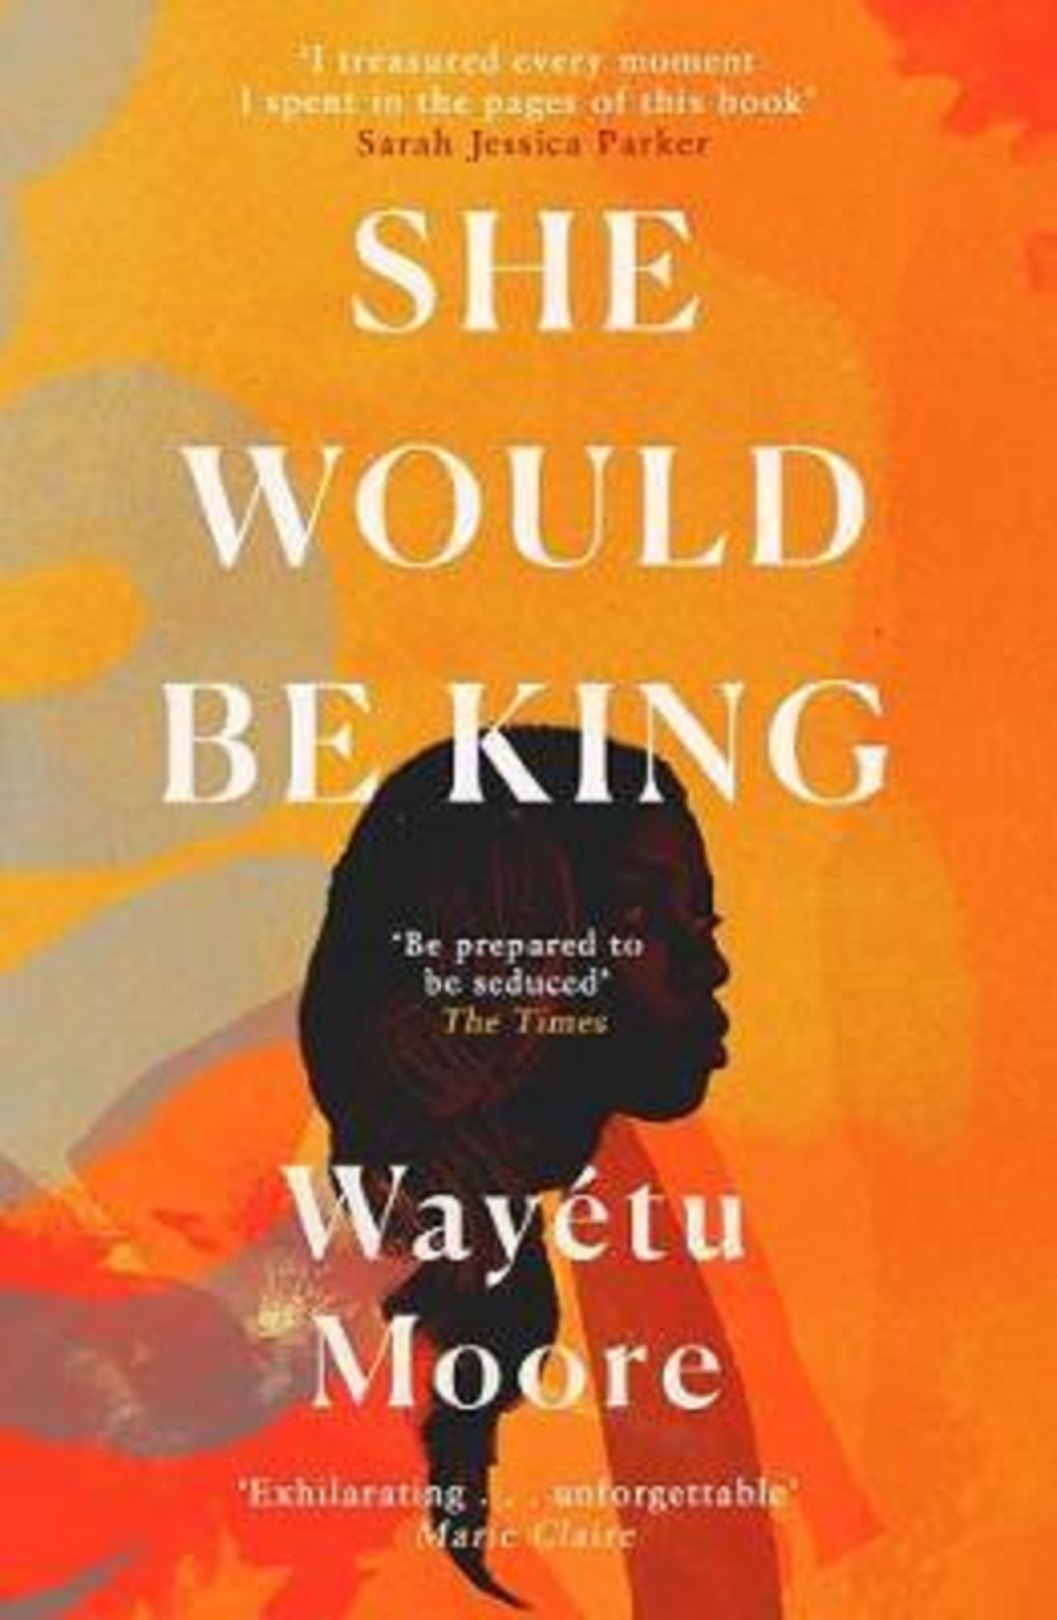 she would be king by wayetu moore